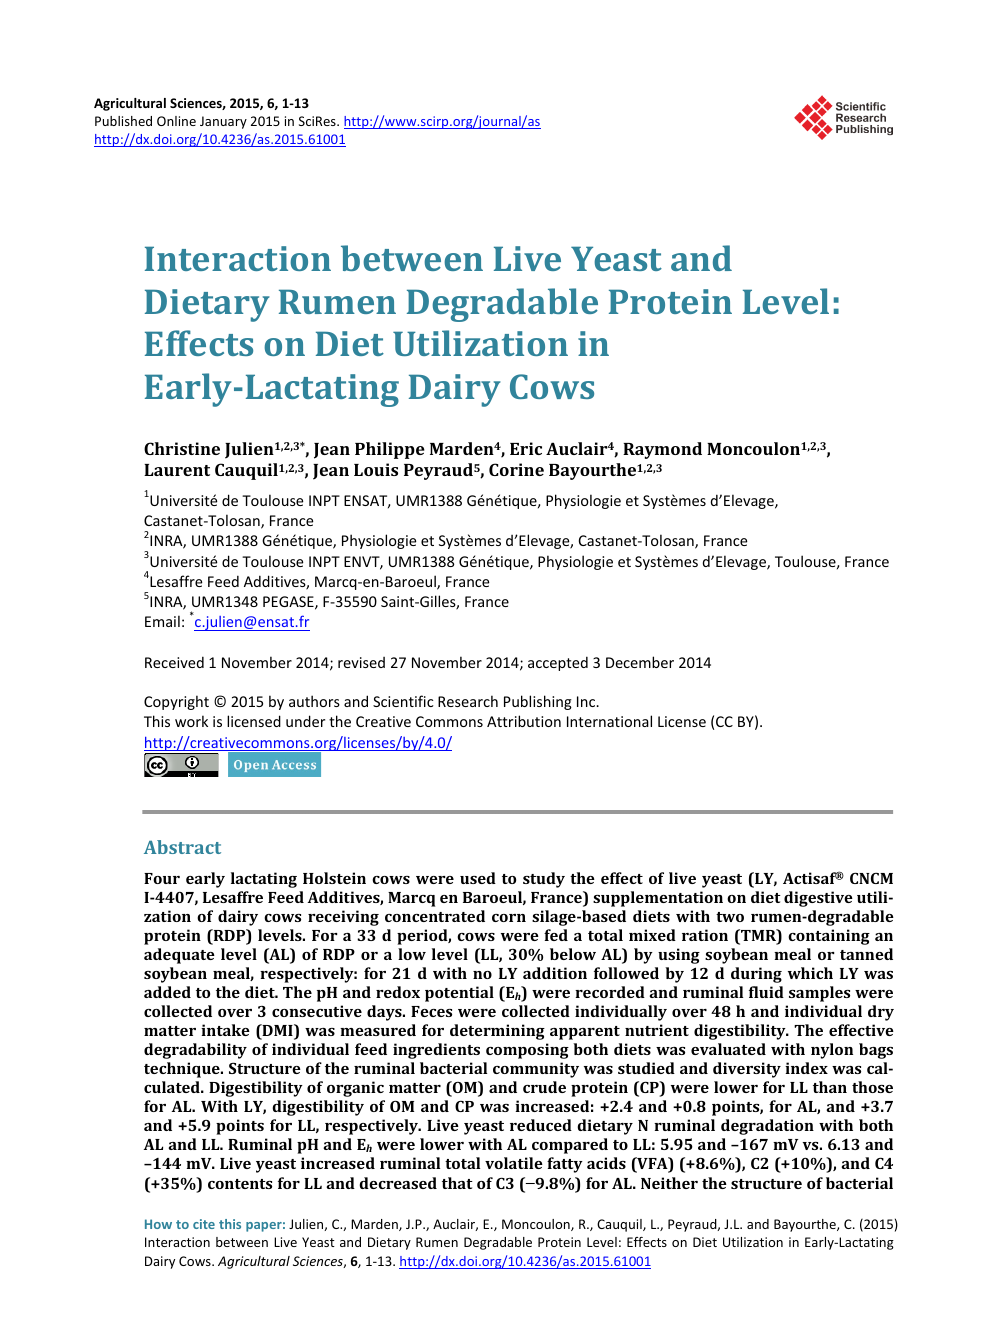 Interaction between Live Yeast and Dietary Rumen Degradable Protein Level:  Effects on Diet Utilization in Early-Lactating Dairy Cows – topic of  research paper in Animal and dairy science. Download scholarly article PDF